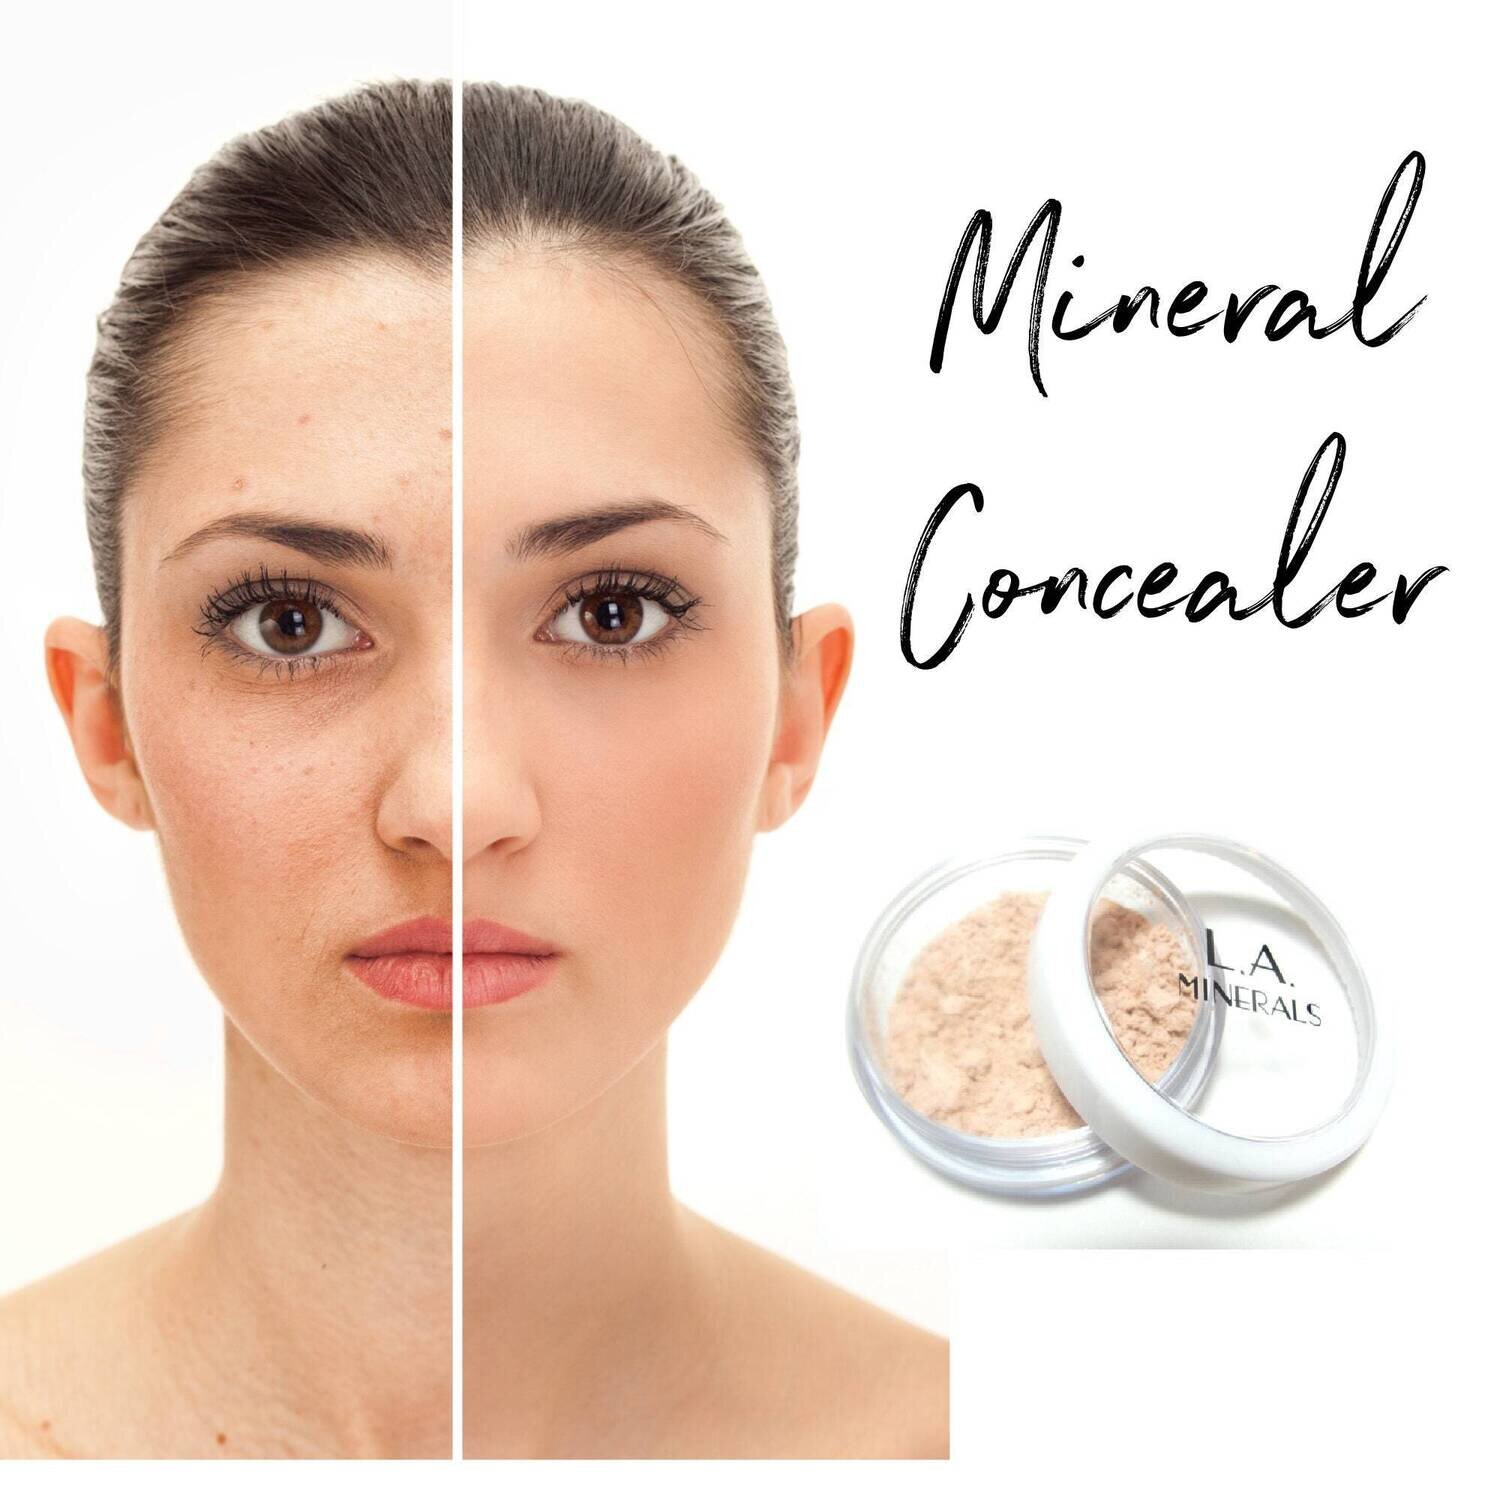 The Incredible L.A. Mineral® Concealer to Cover and Conceal Dark Circles, Acne and Spots